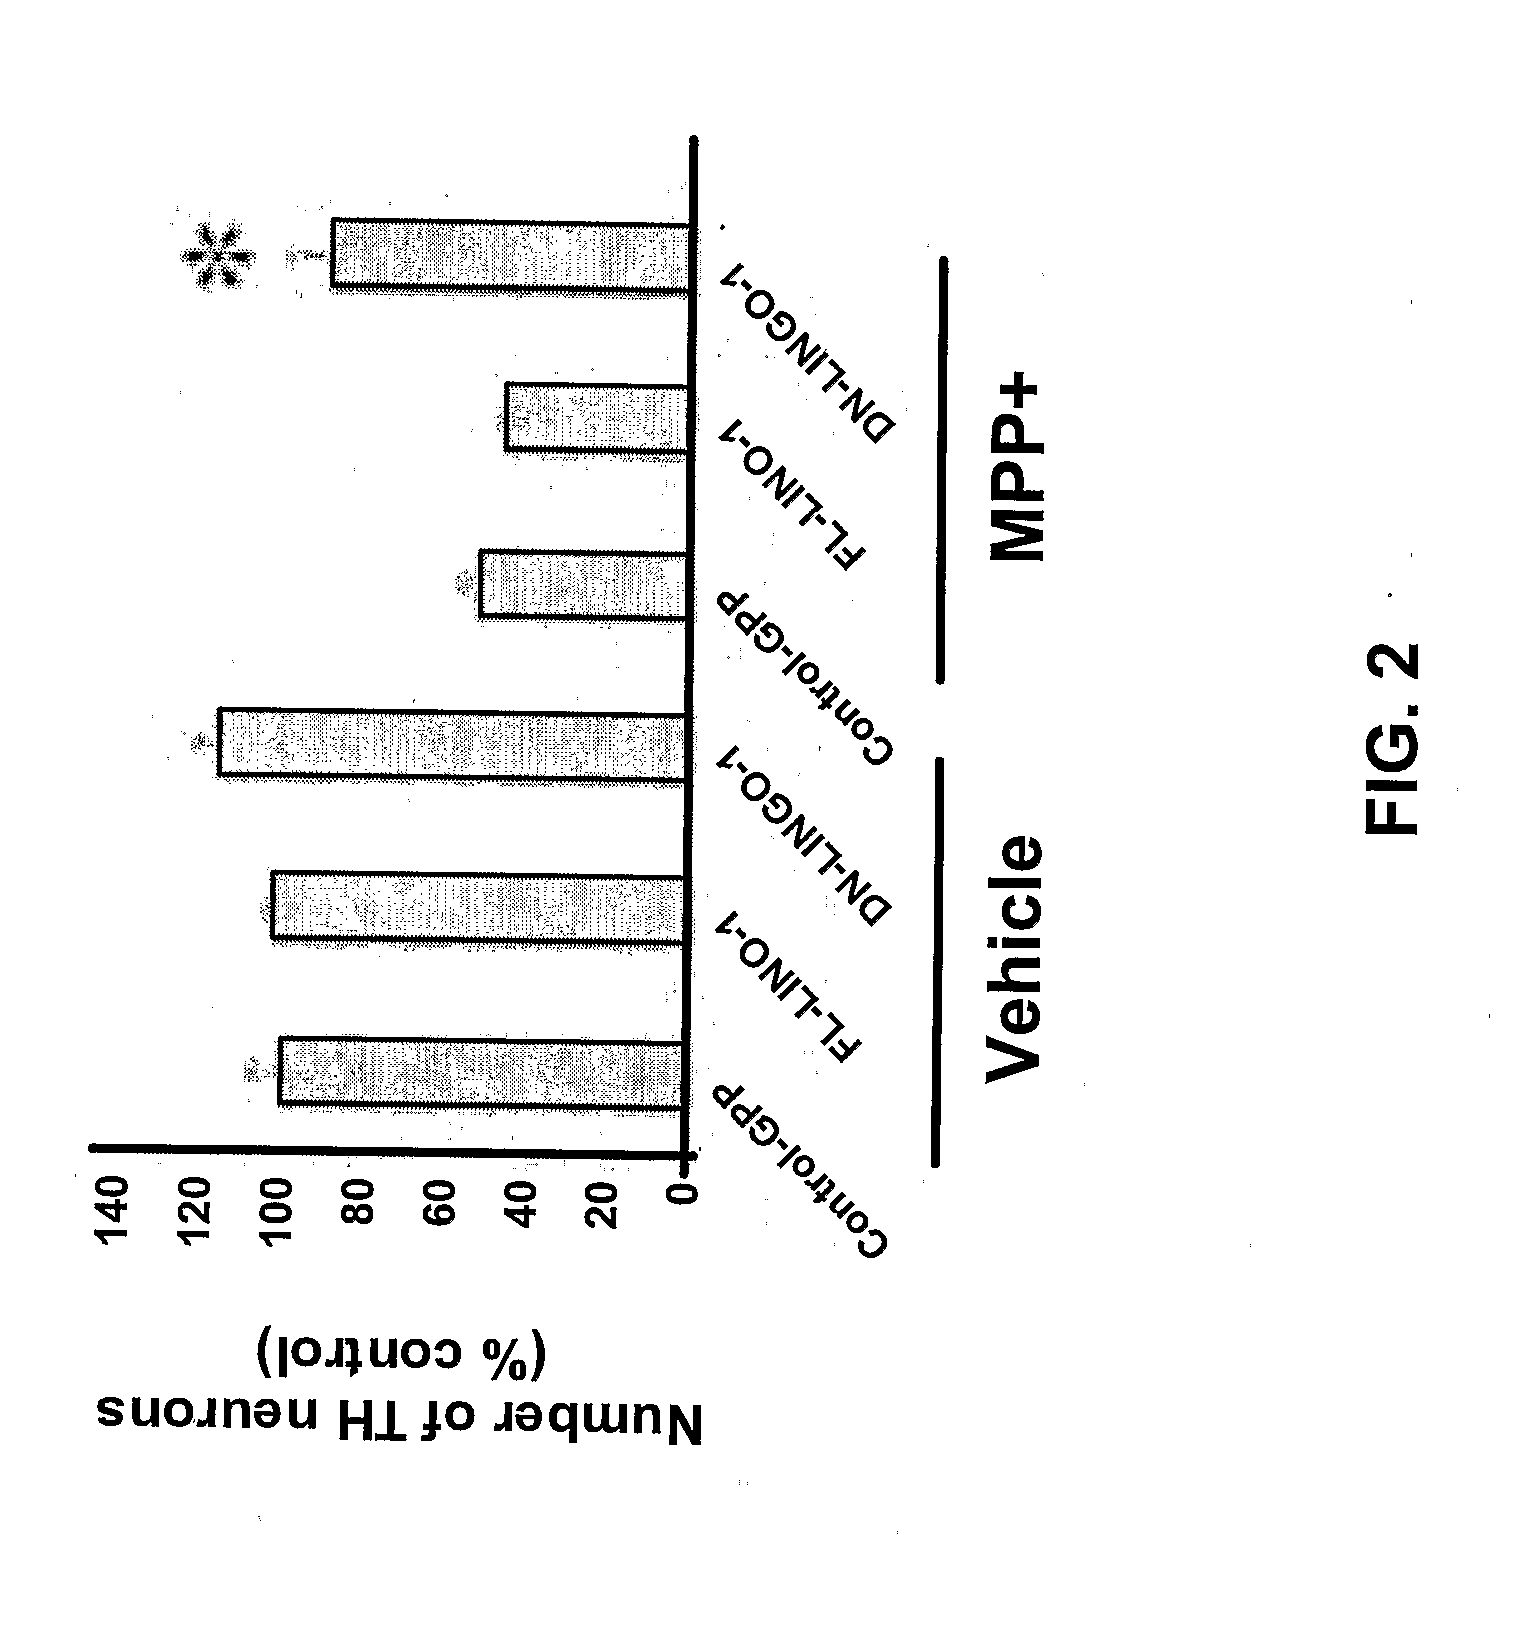 Methods for Promoting Neurite Outgrowth and Survival of Dopaminergic Neurons